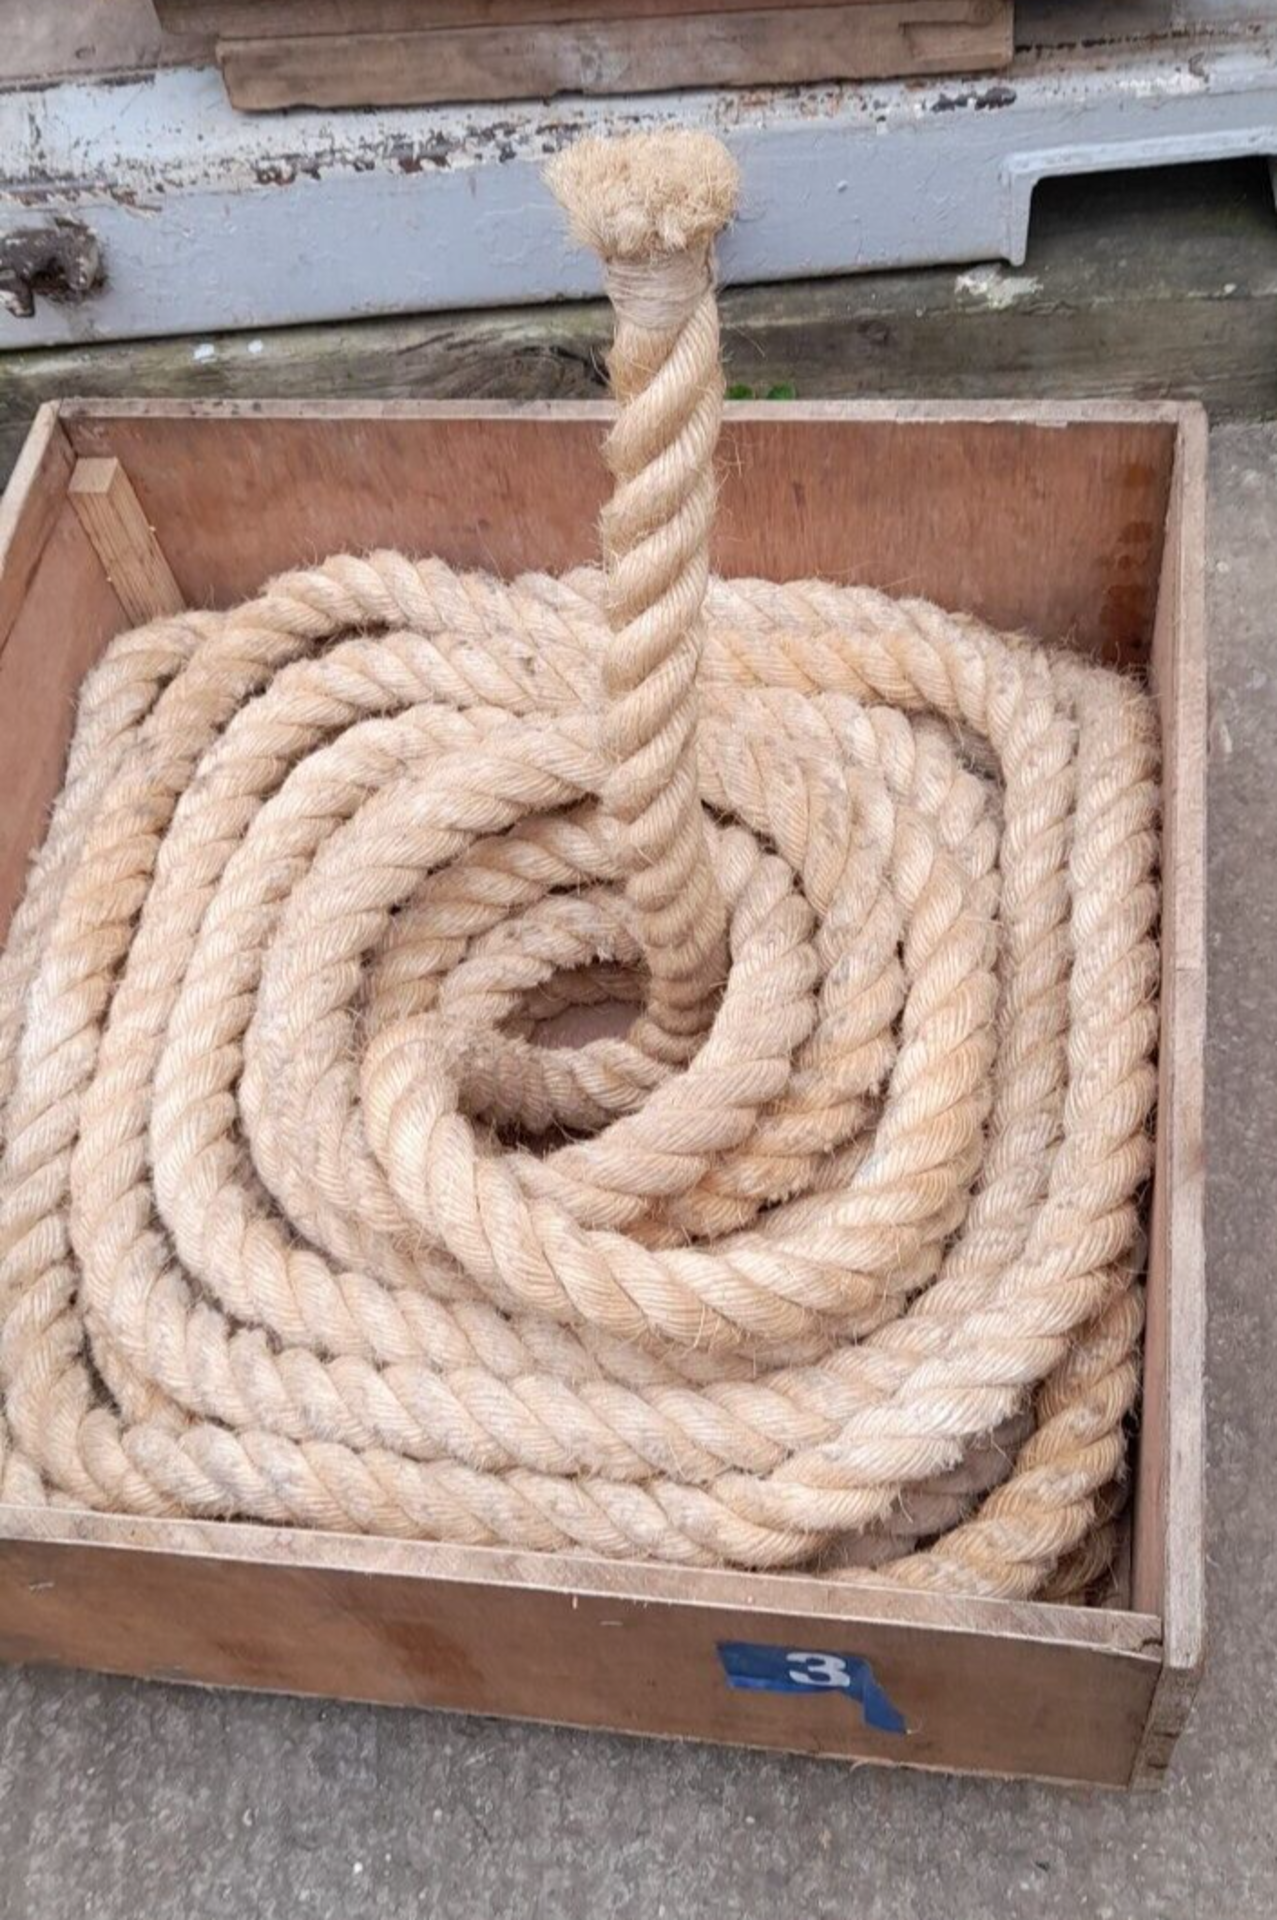 sport TUG O WAR ROPE, USED ONCE, DRY STORED, ABOUT 29 METERS L X 13cm circumference sport gym - Image 5 of 5